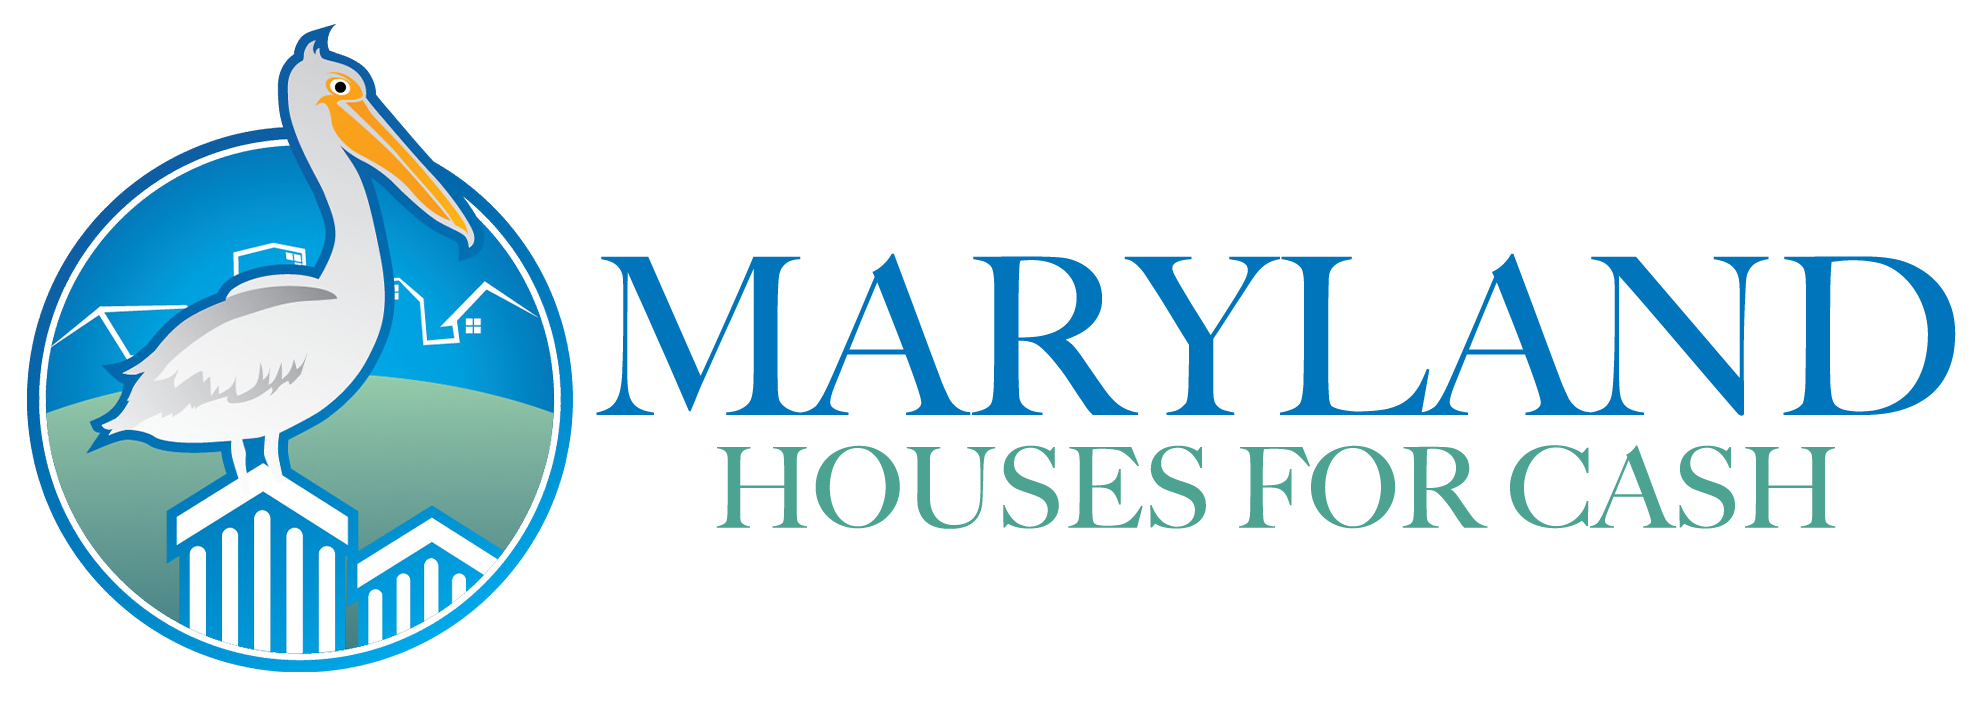 Maryland Houses For Cash